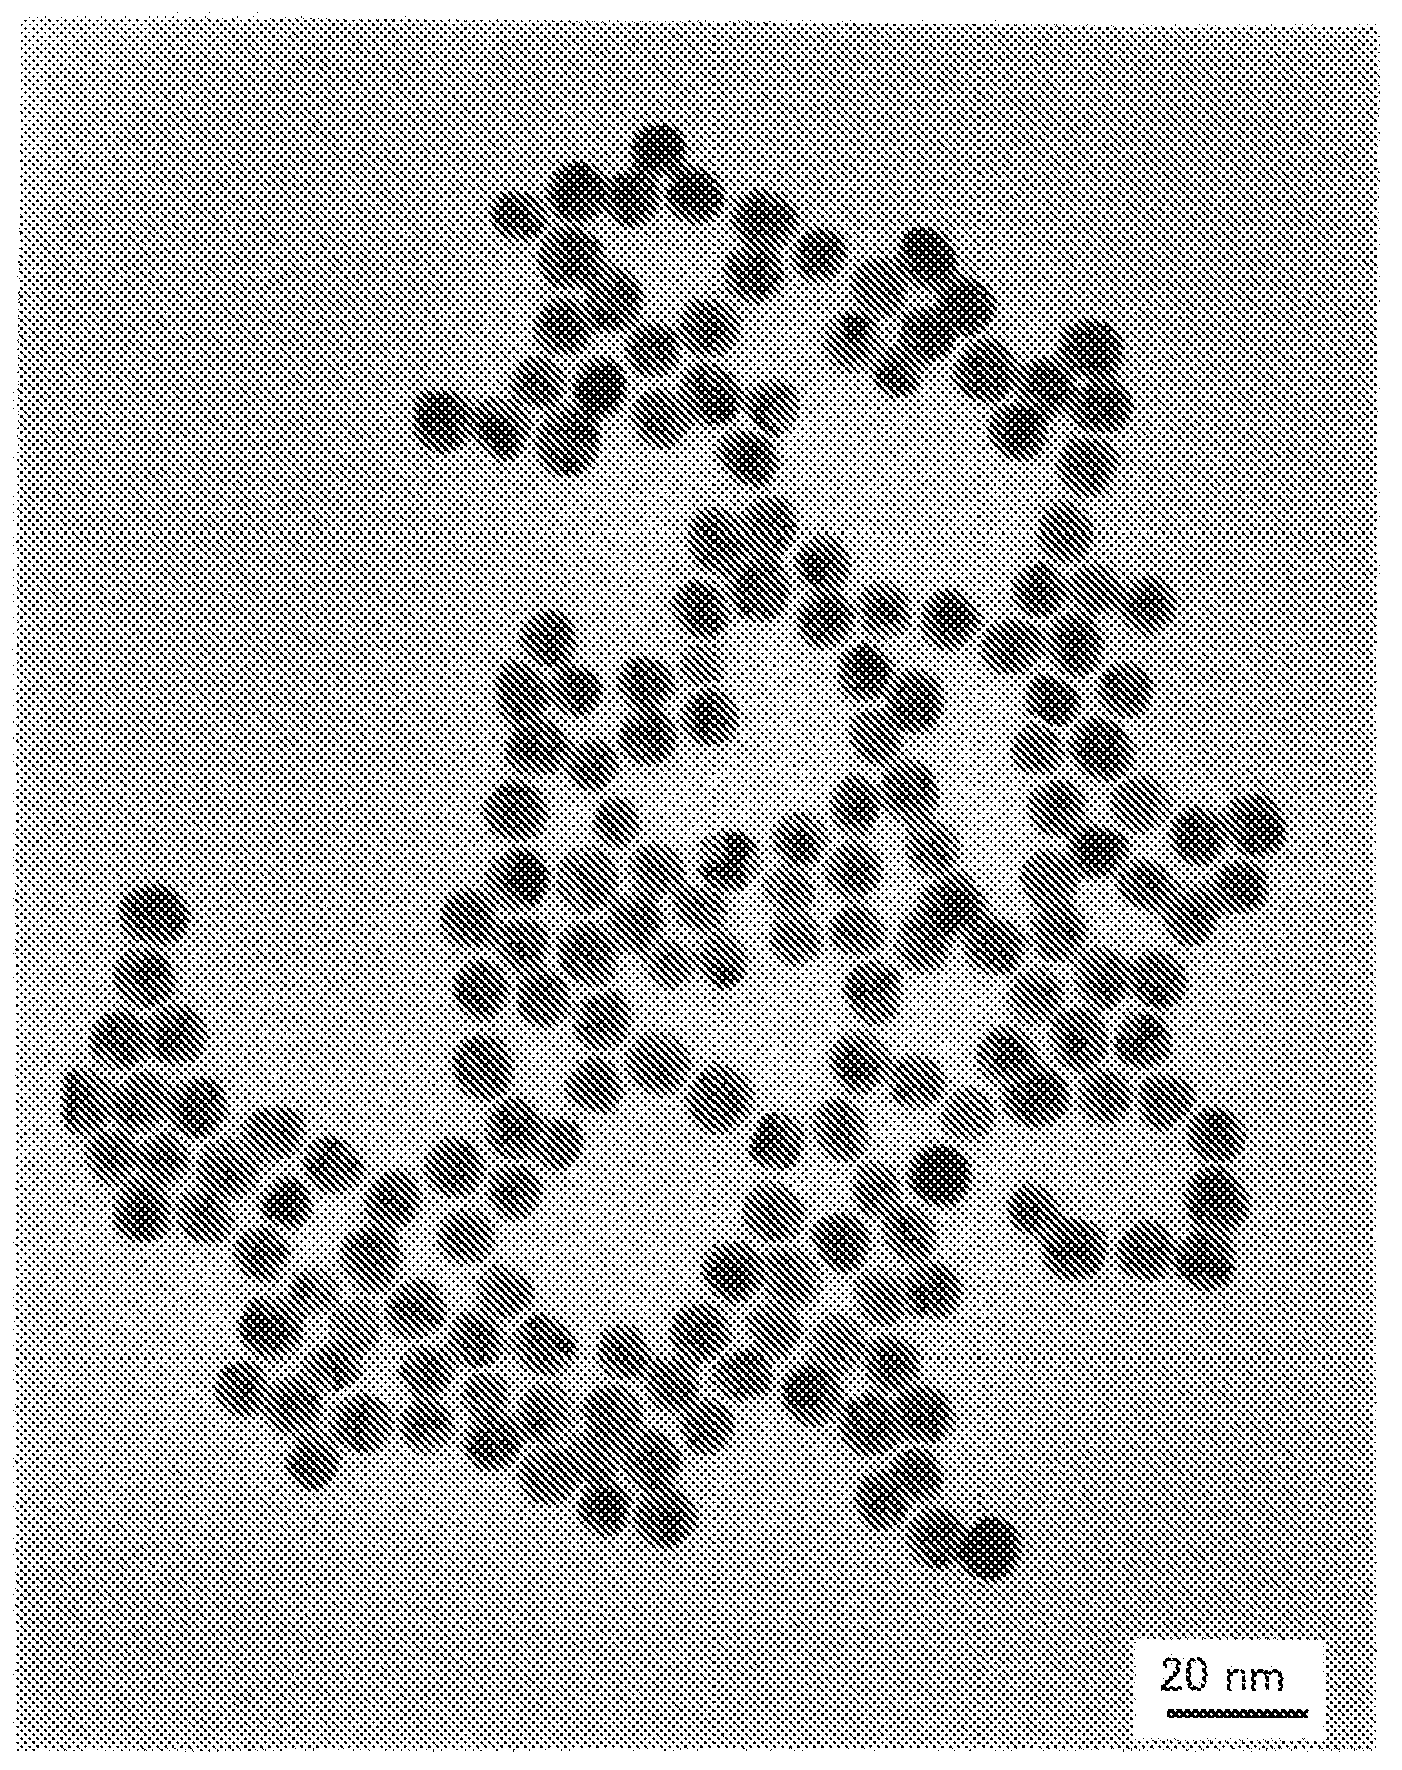 Metallic nanoparticle composite and method for producing the same